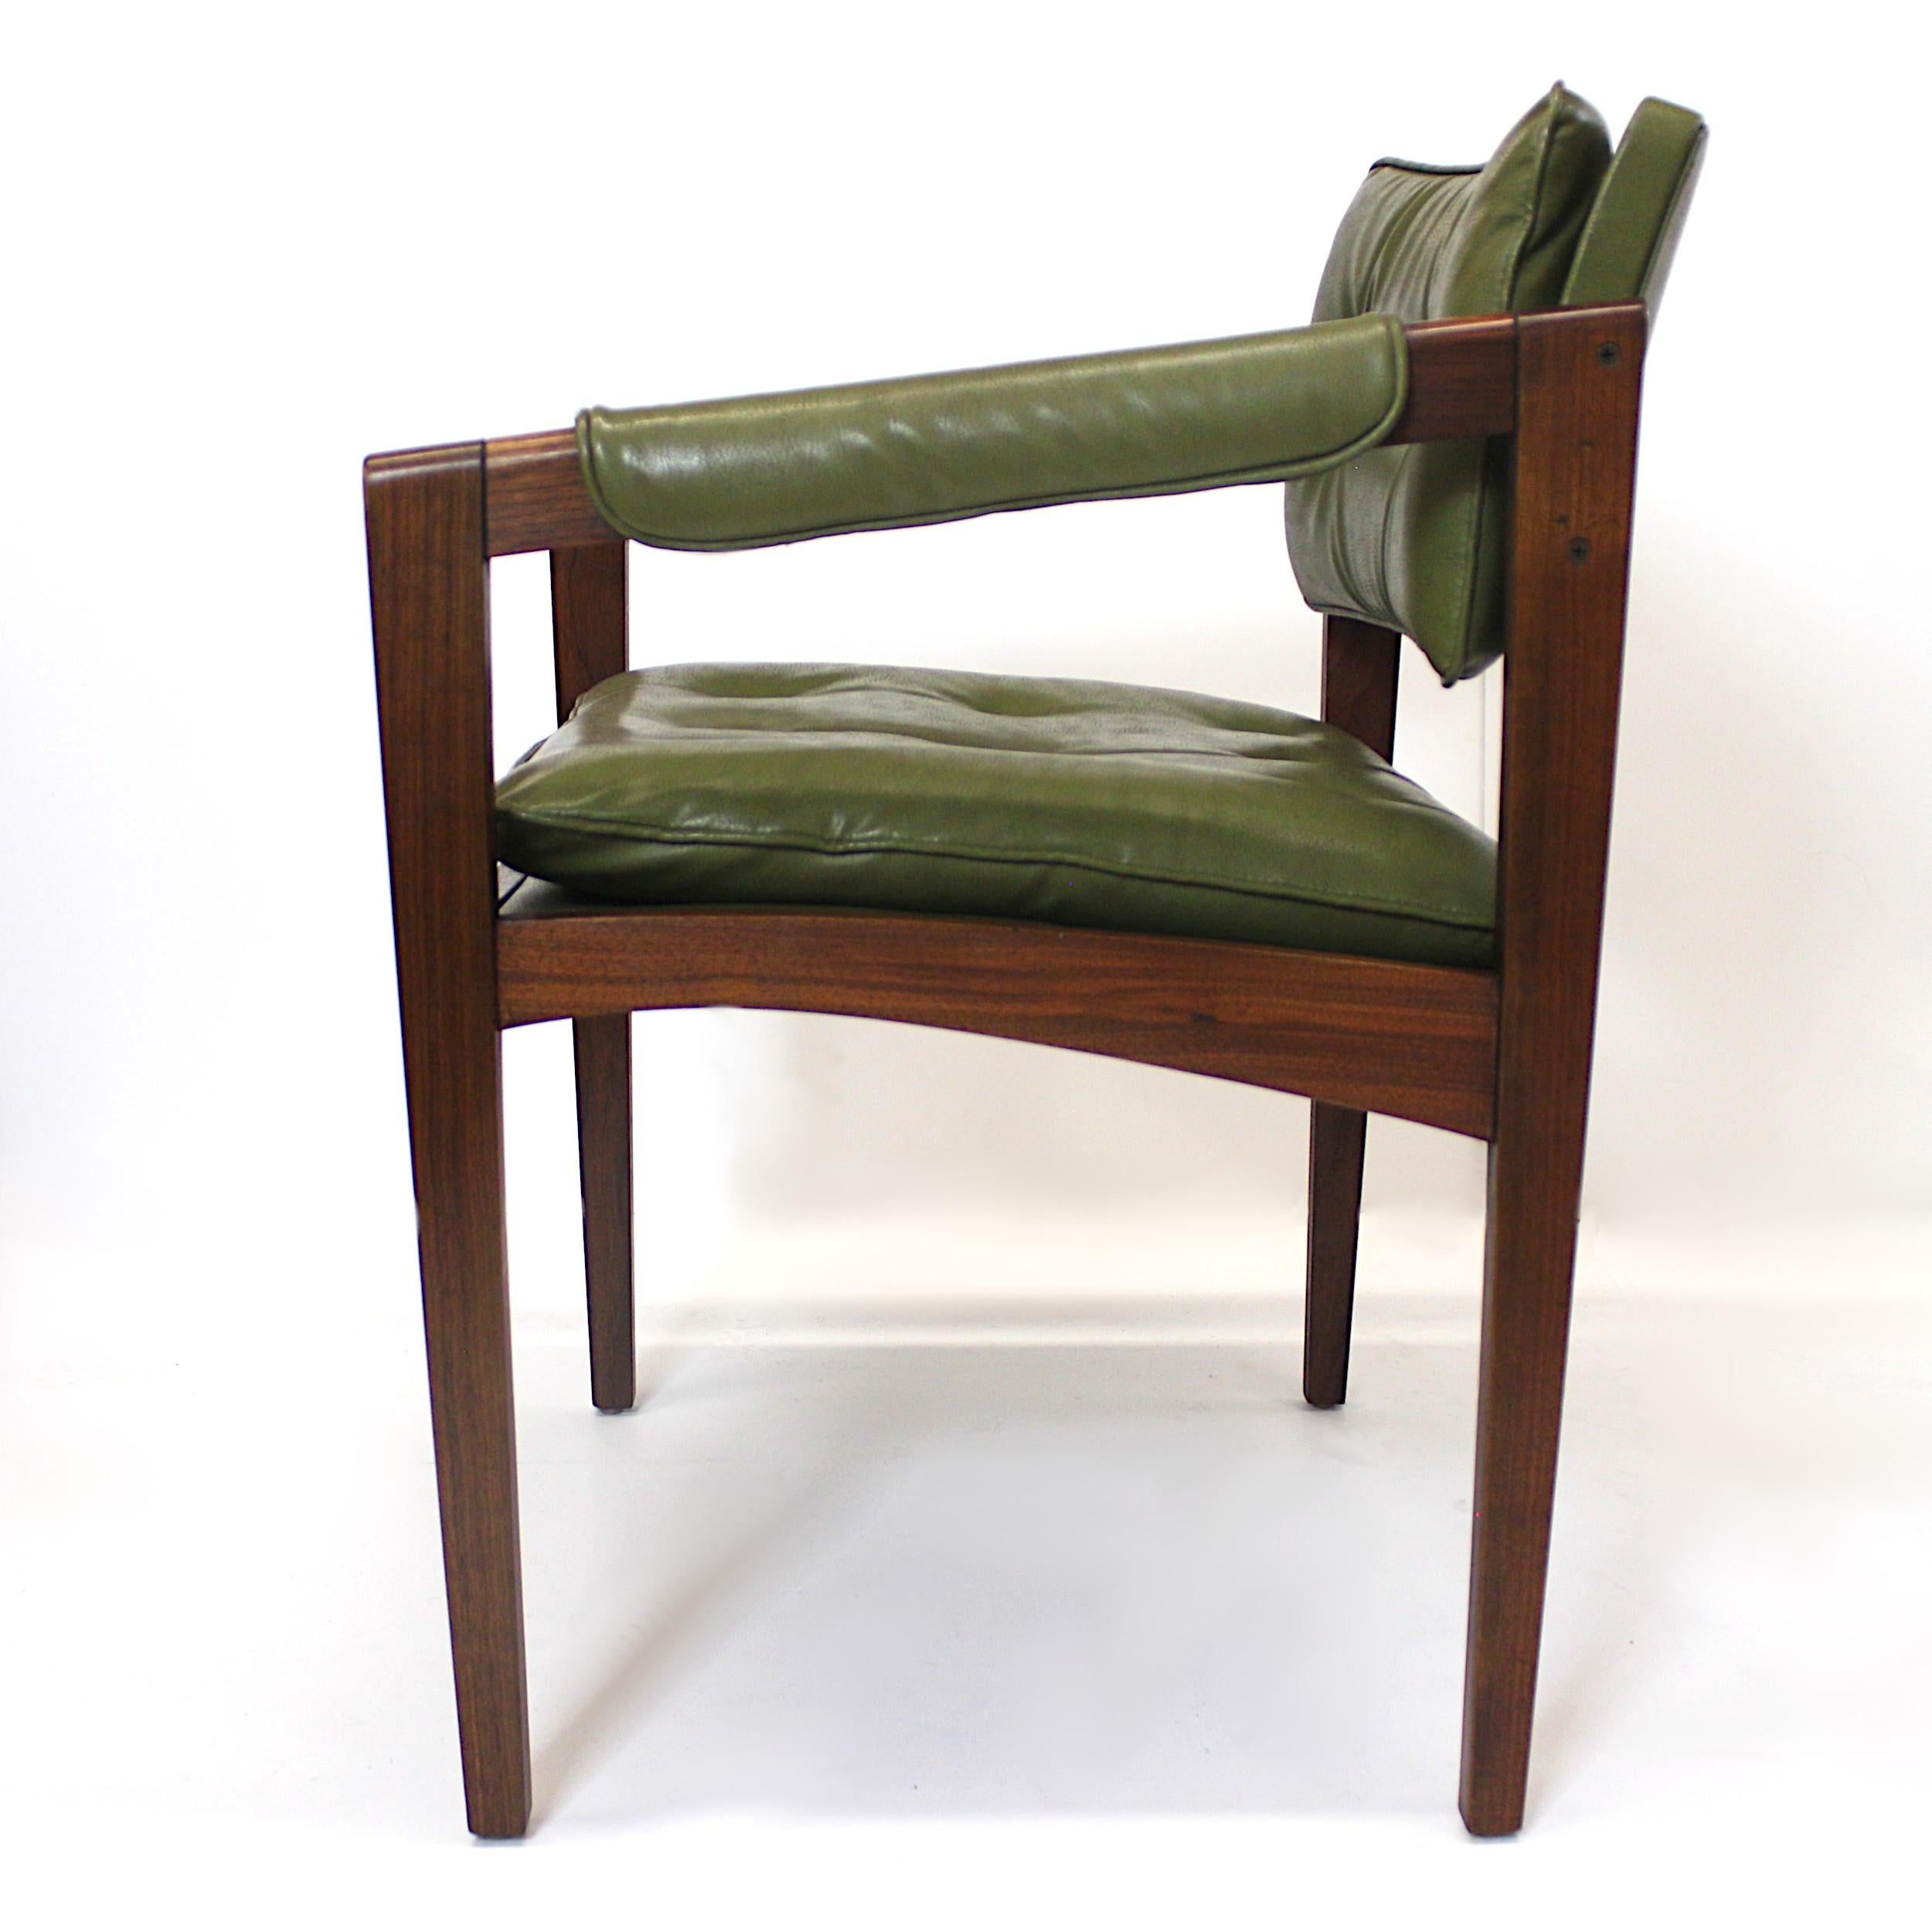 Unusual Pair of Green Mid-Century Modern Lounge Chairs by Glenn of California 3